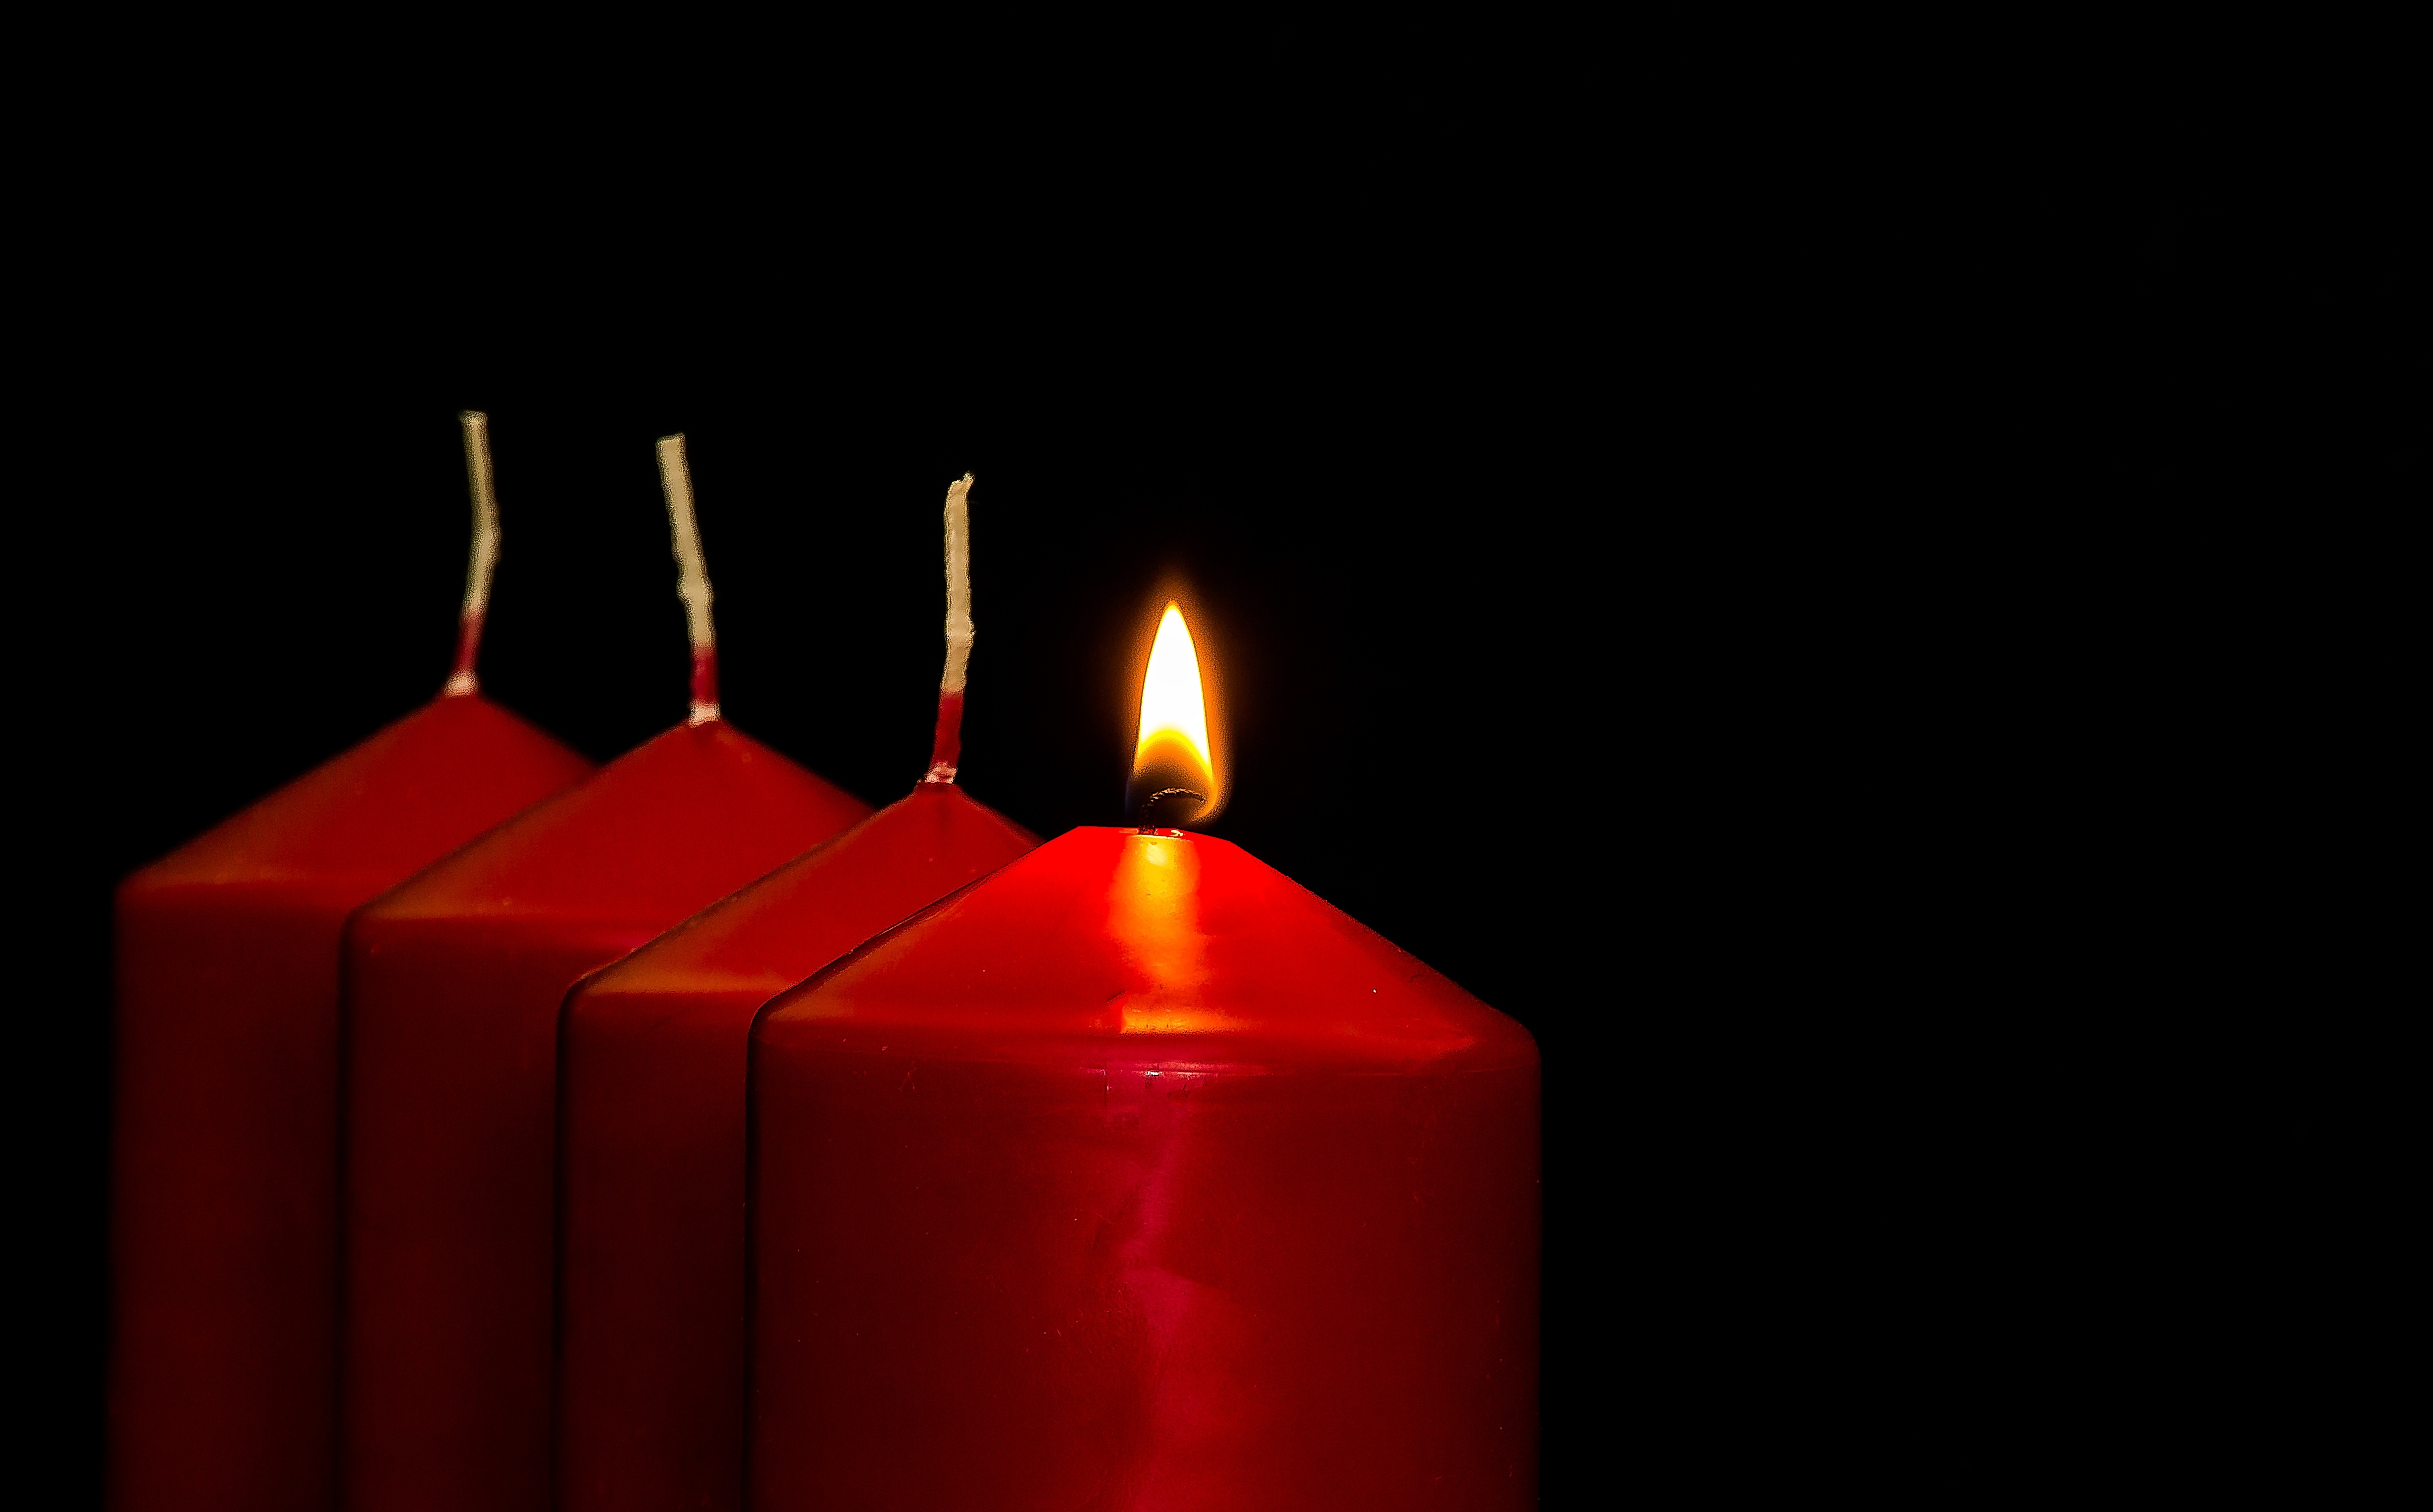 Canva - Four Lit Red Candles.jpg